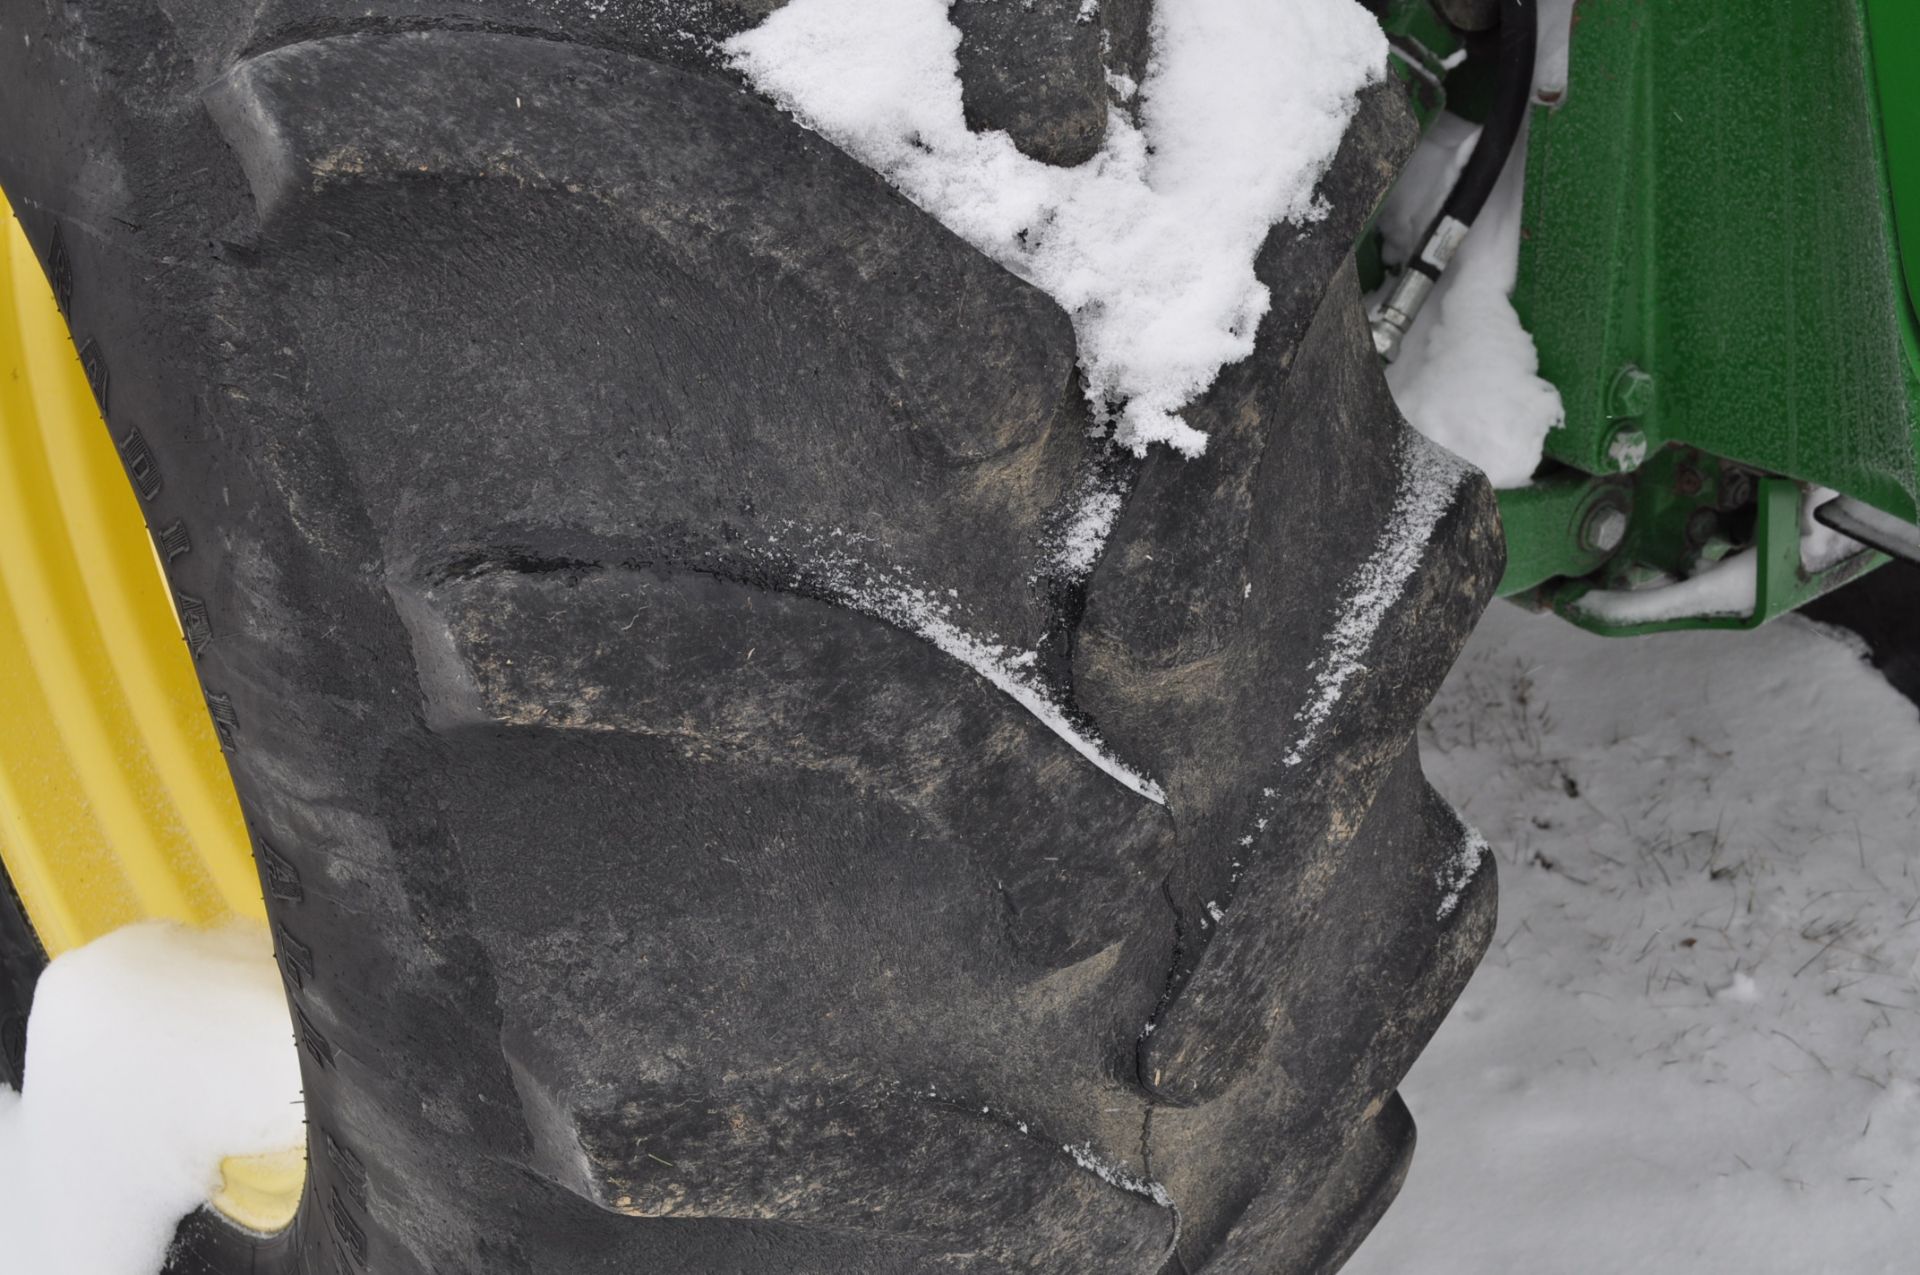 John Deere 8520 tractor, MFWD, ILS, 800/70 R 38 tires & duals, 600/70 R 30 front, PS, 3 pt, 1000 - Image 9 of 20